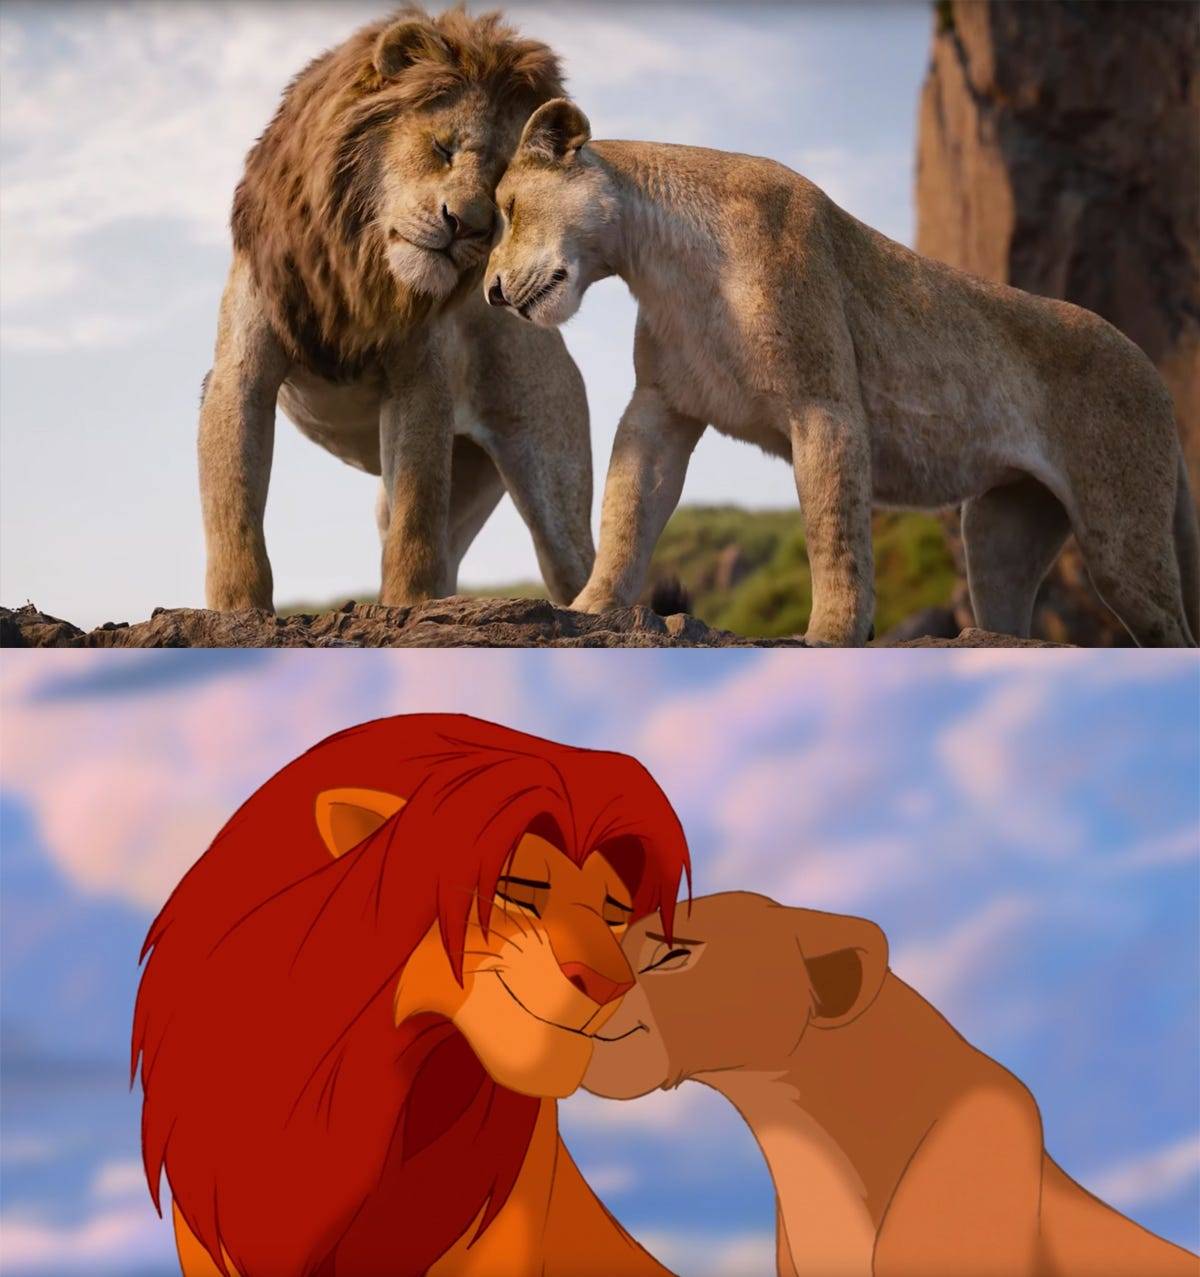 The above is a shot of Simba and Nala from the 2019 version of "The Li...